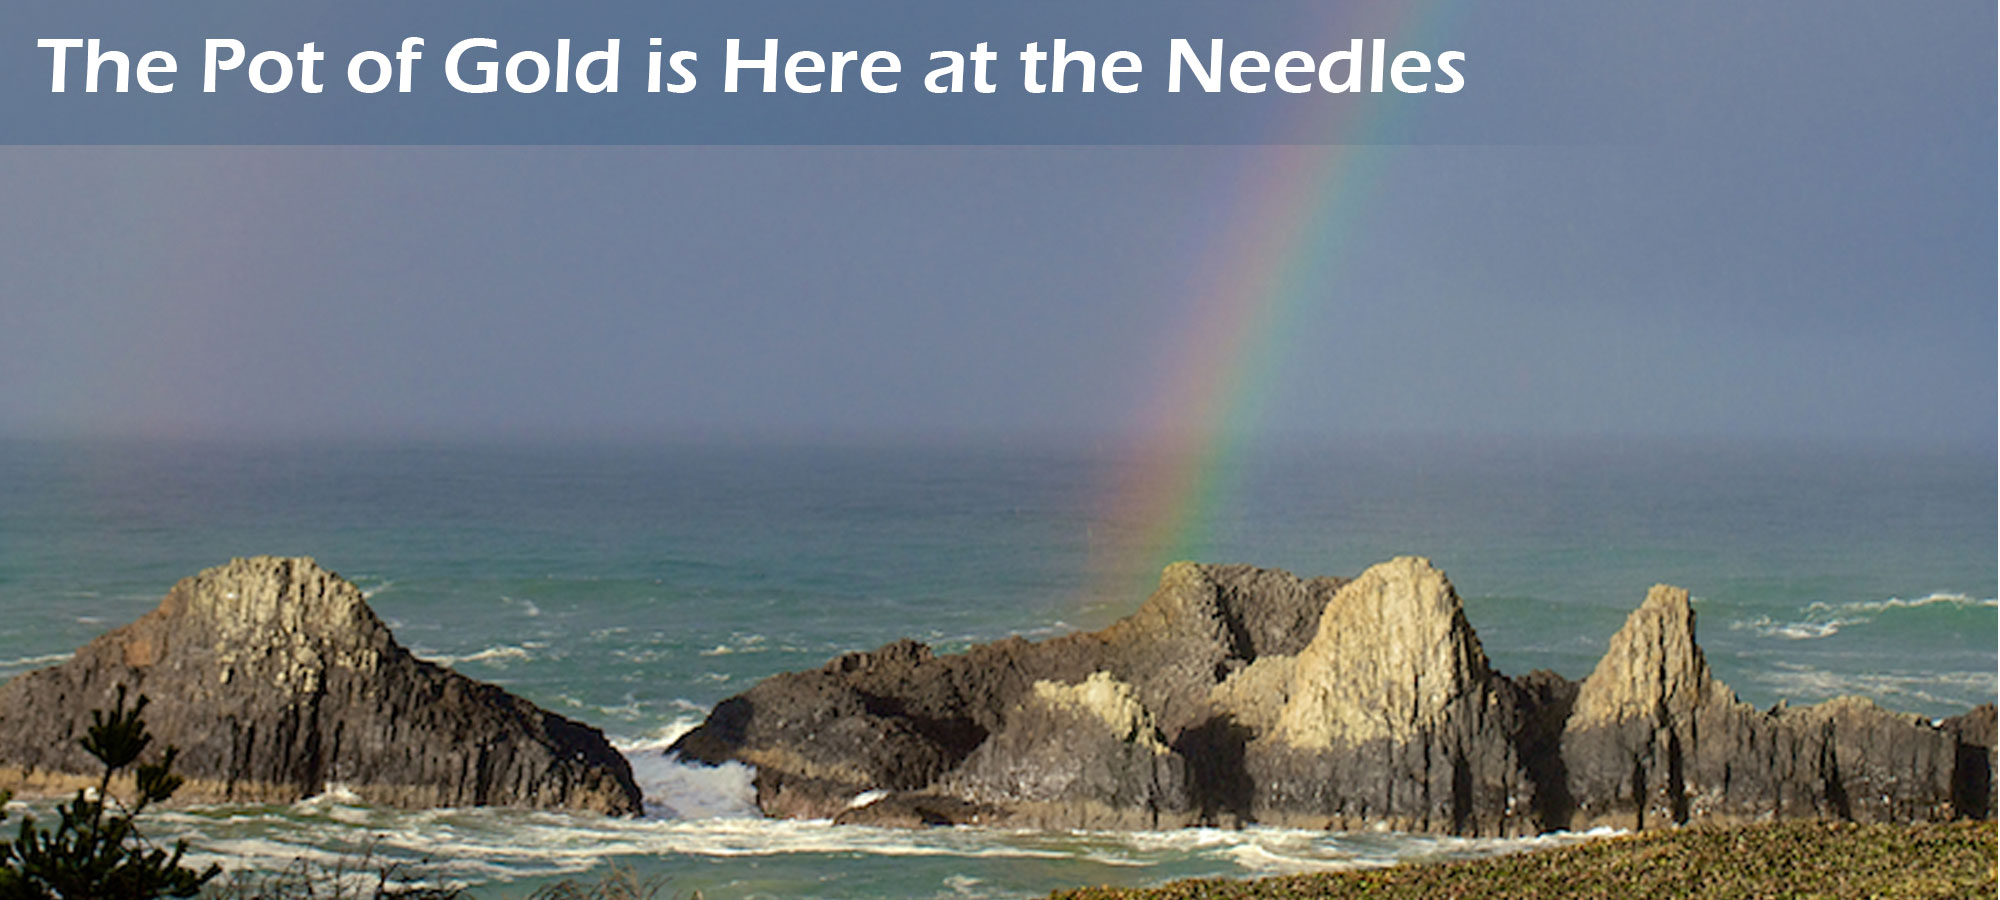 The Pot of Gold is Here at the Needles